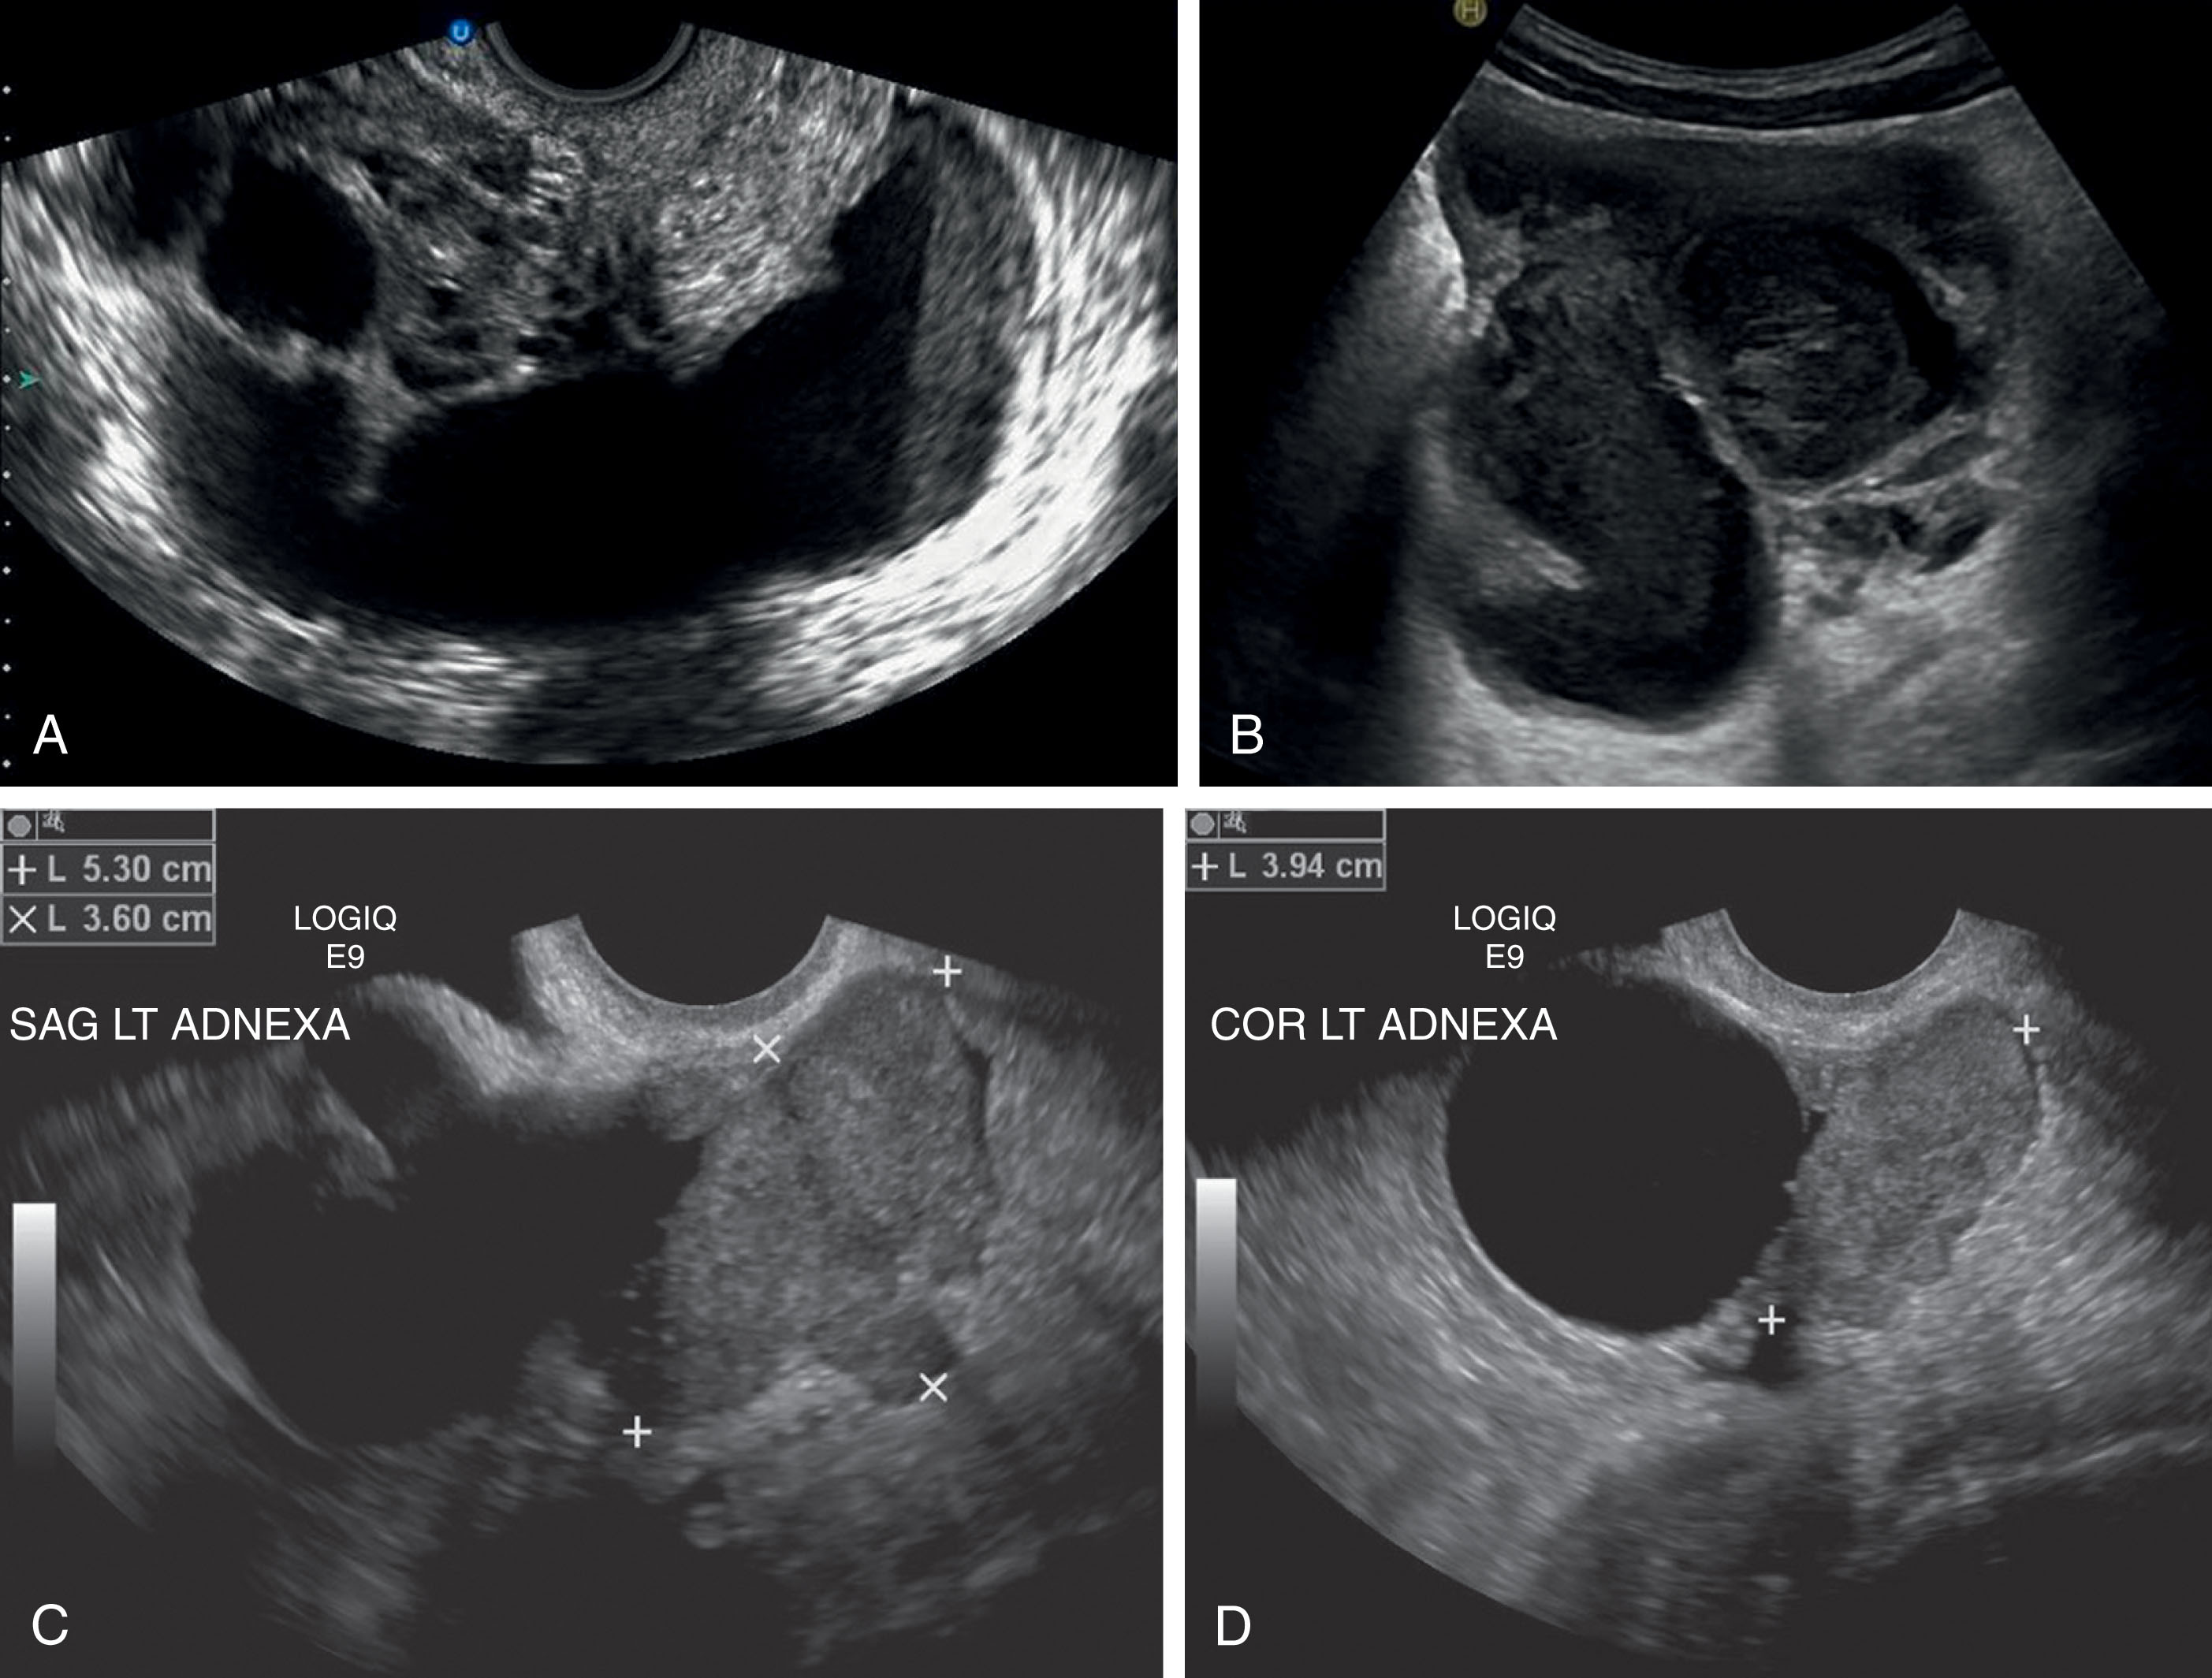 Fig. 45.4, (A) Pyosalpinx. In the presence of infection, the fallopian tube fills with pus, which is seen as low-level echoes and thick walls. (B) Acute salpingitis. The tube is enlarged and distended with pus appearing as complex echoes within. Note the thick walls. (C–D) Hydrosalpinx. This 81-year-old patient presented with left lower leg swelling. Computed tomography confirmed left common iliac vein thrombosis. Ultrasound demonstrated a left hydrosalpinx with adjacent mass, possibly within the fallopian tube. Surgical pathology confirmed a left hydrosalpinx with adjacent ovarian serous adenocarcinoma.